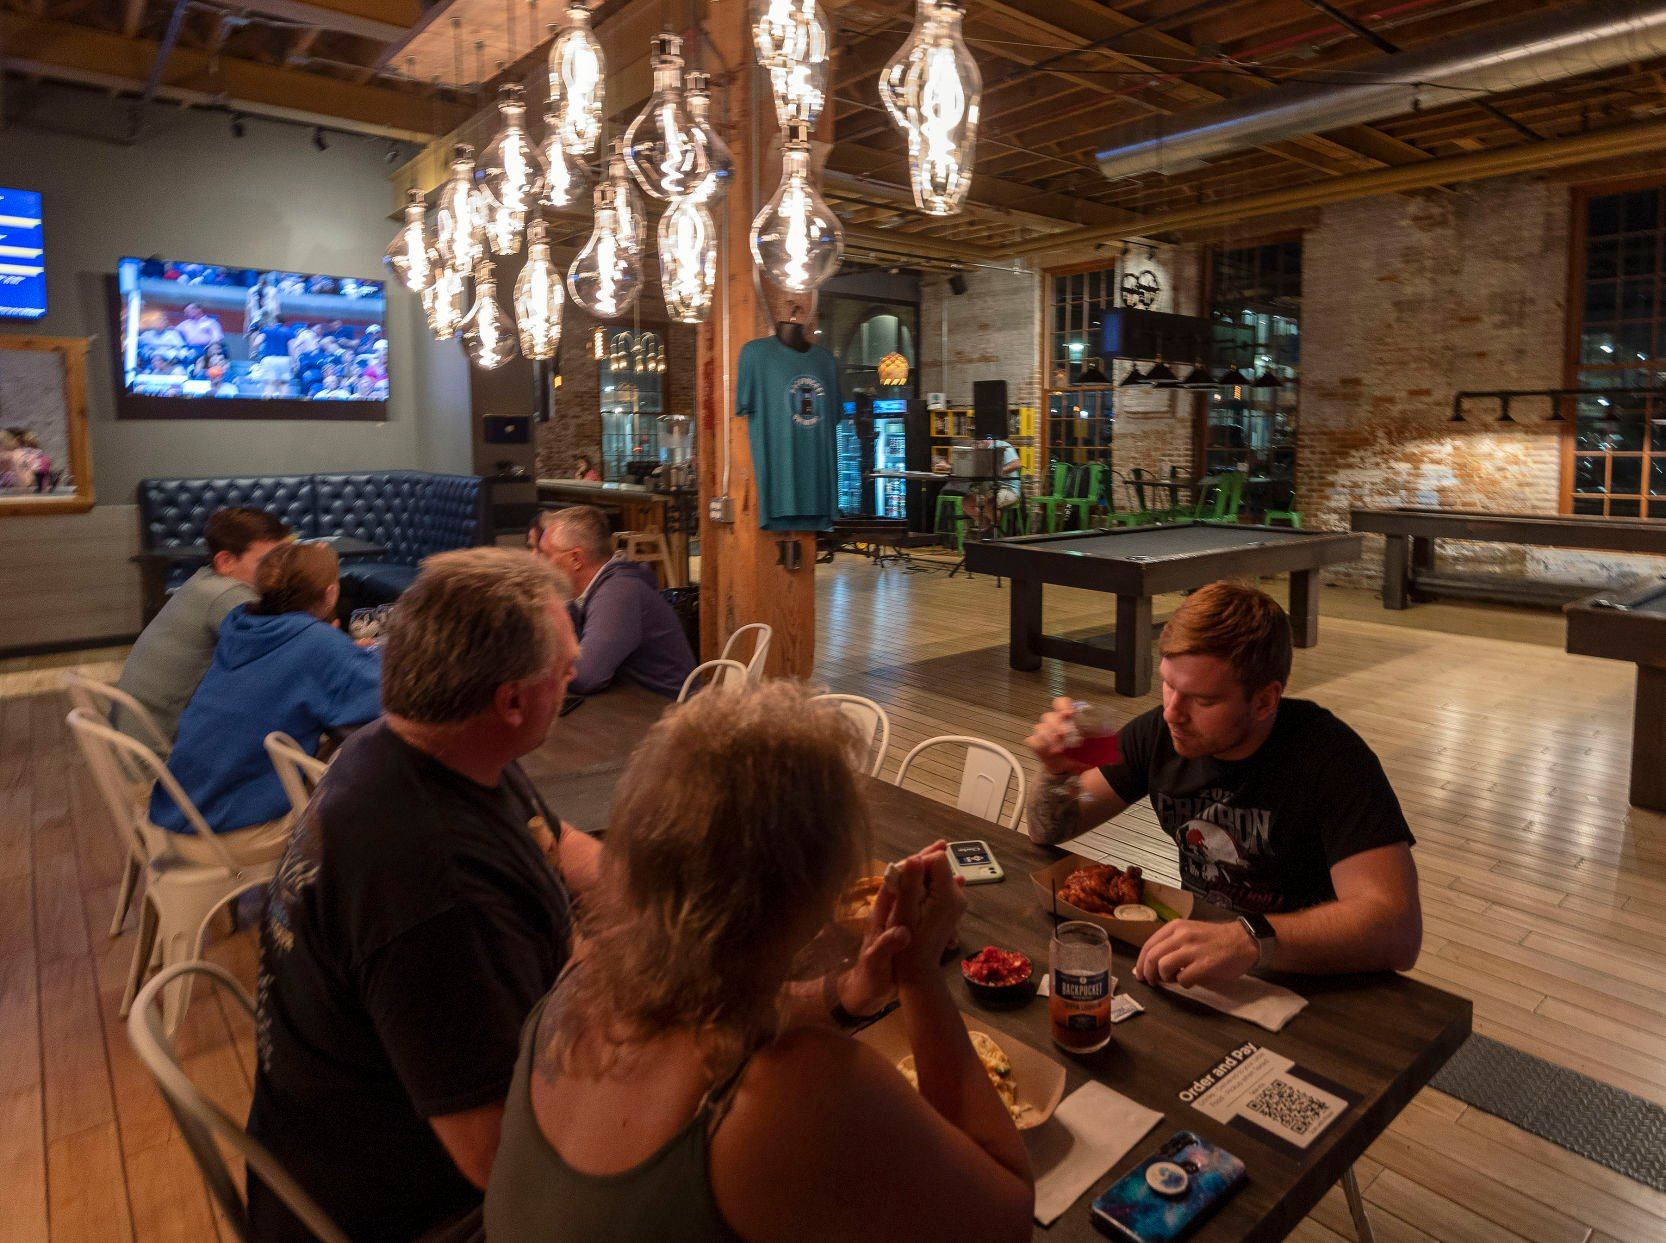 Teams play trivia at Backpocket Taproom in Dubuque. The events draw in people on weekday evenings, which normally aren’t busy. It boosts sales and many customers return each week for the contests.    PHOTO CREDIT: Stephen Gassman